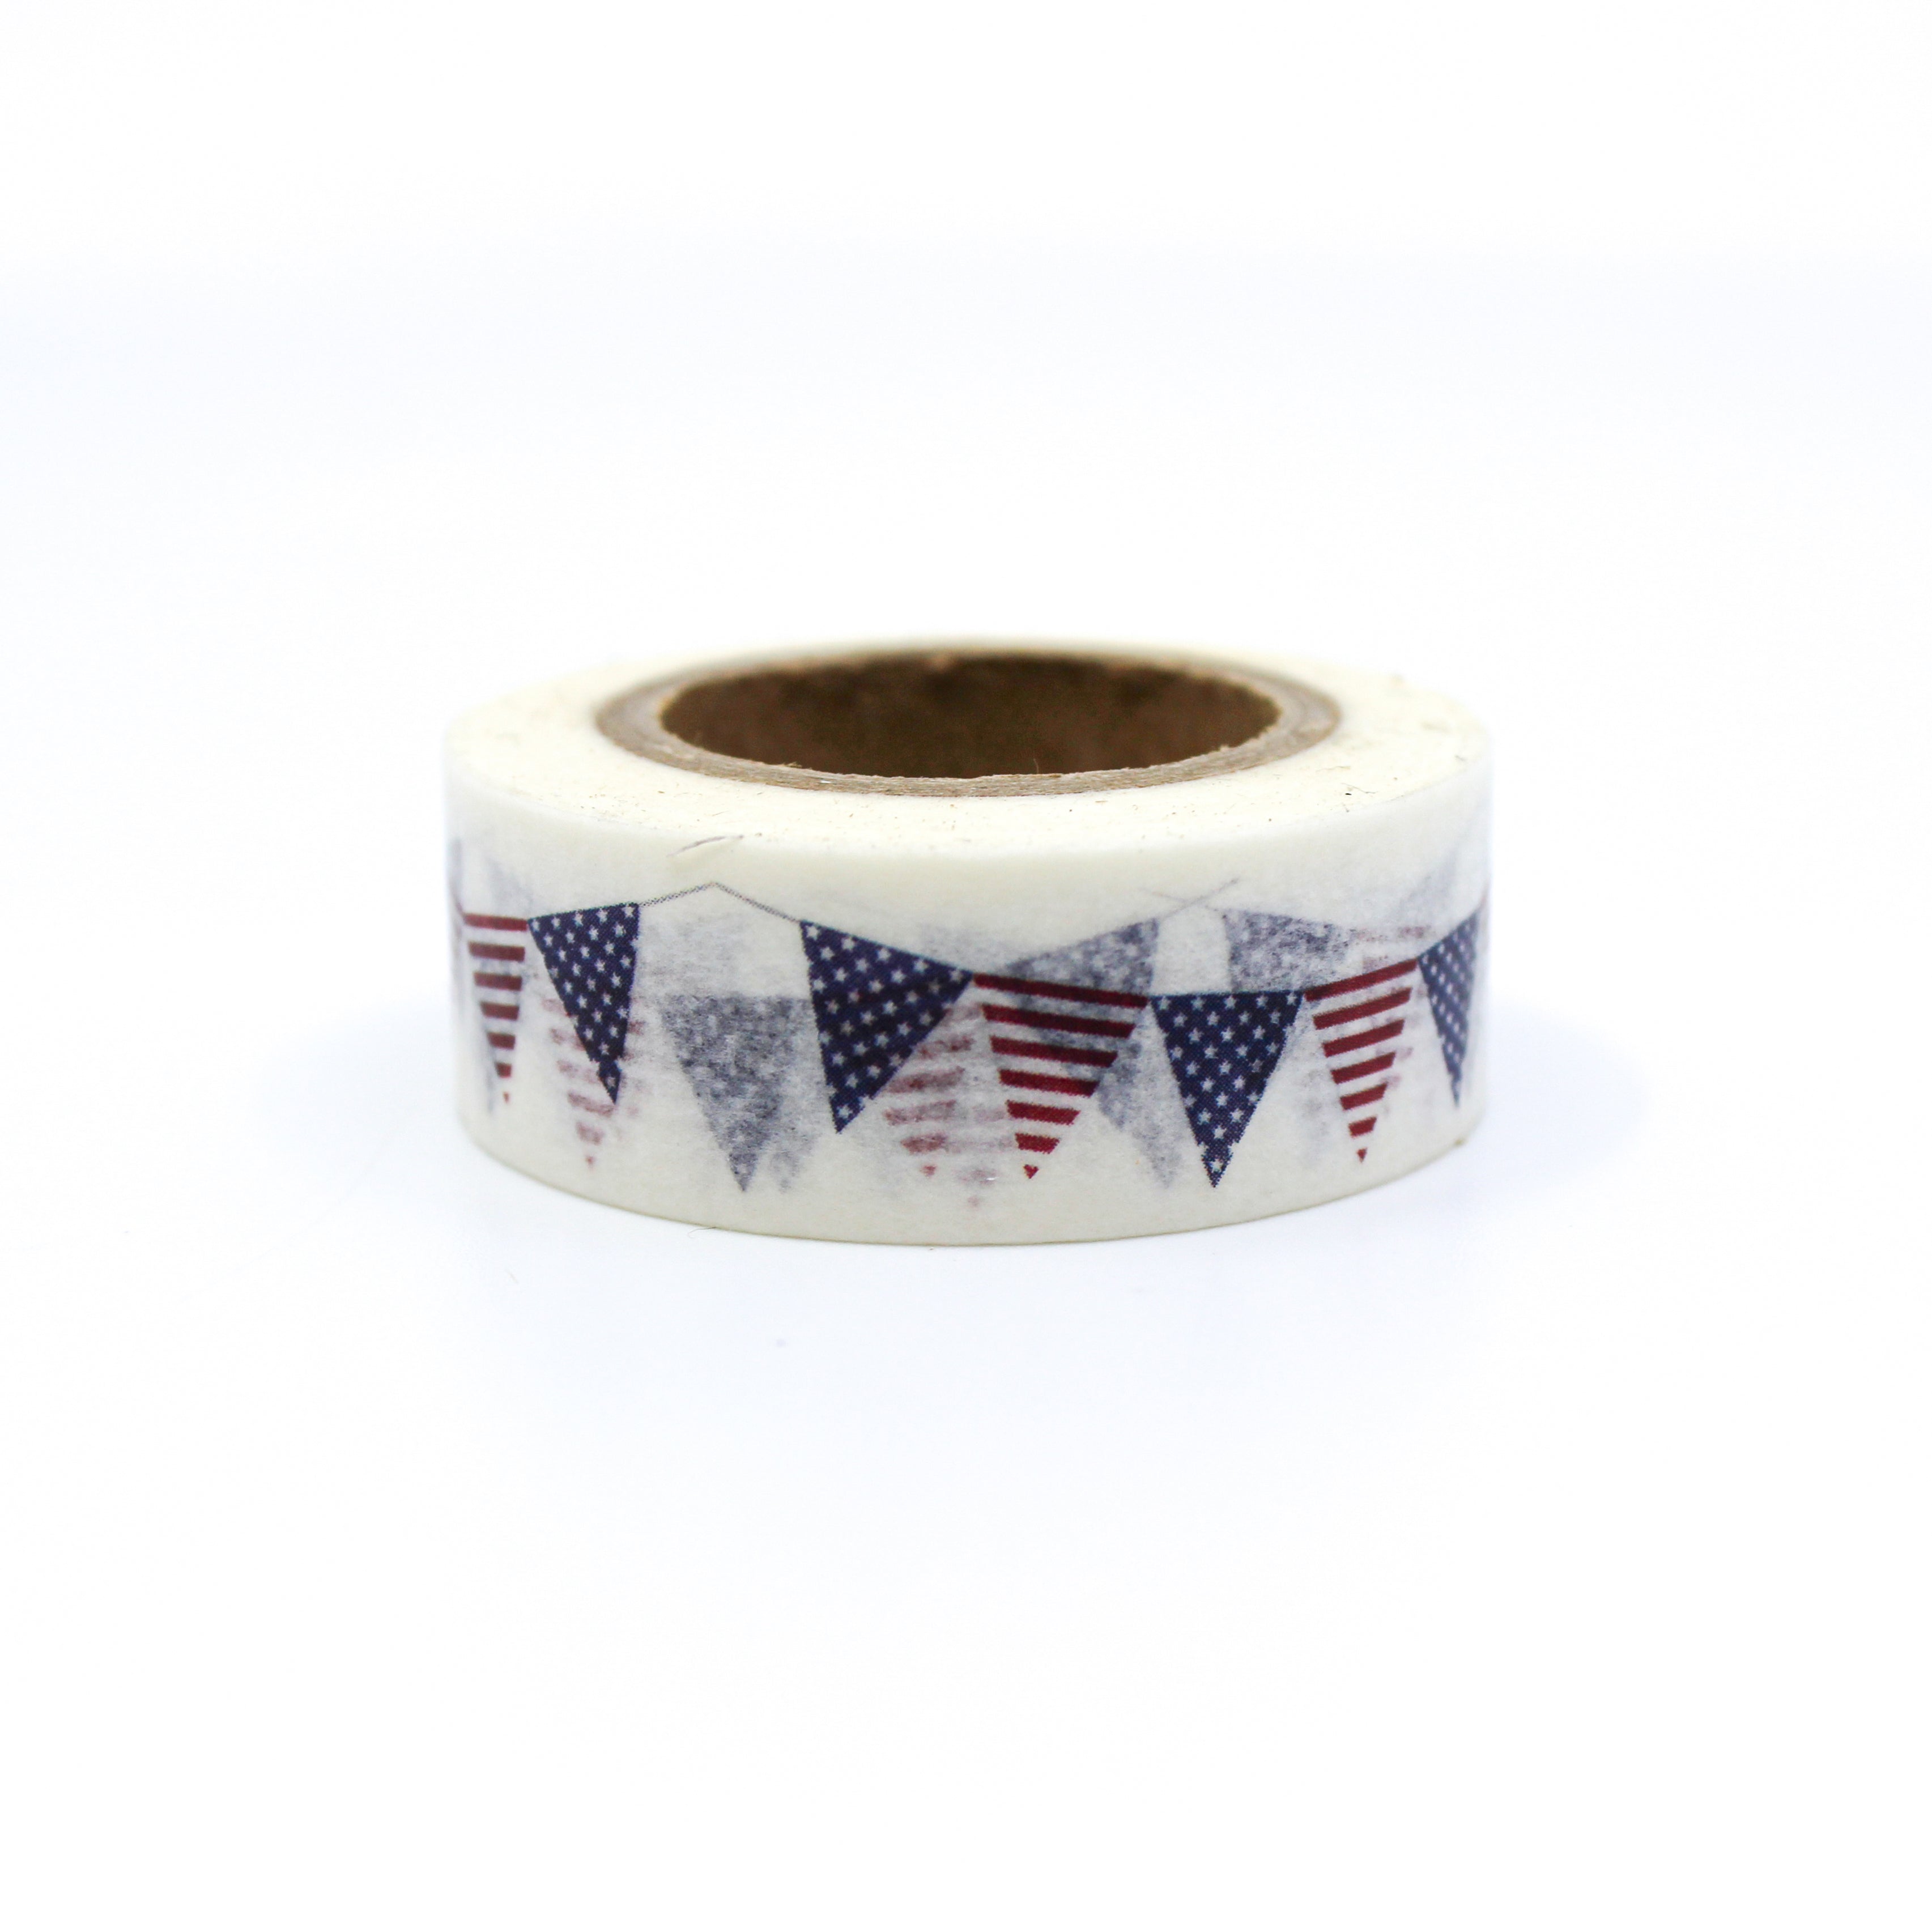 This is a multi-strung American flags pattern with white background washi tape from BBB Supplies Craft Shop